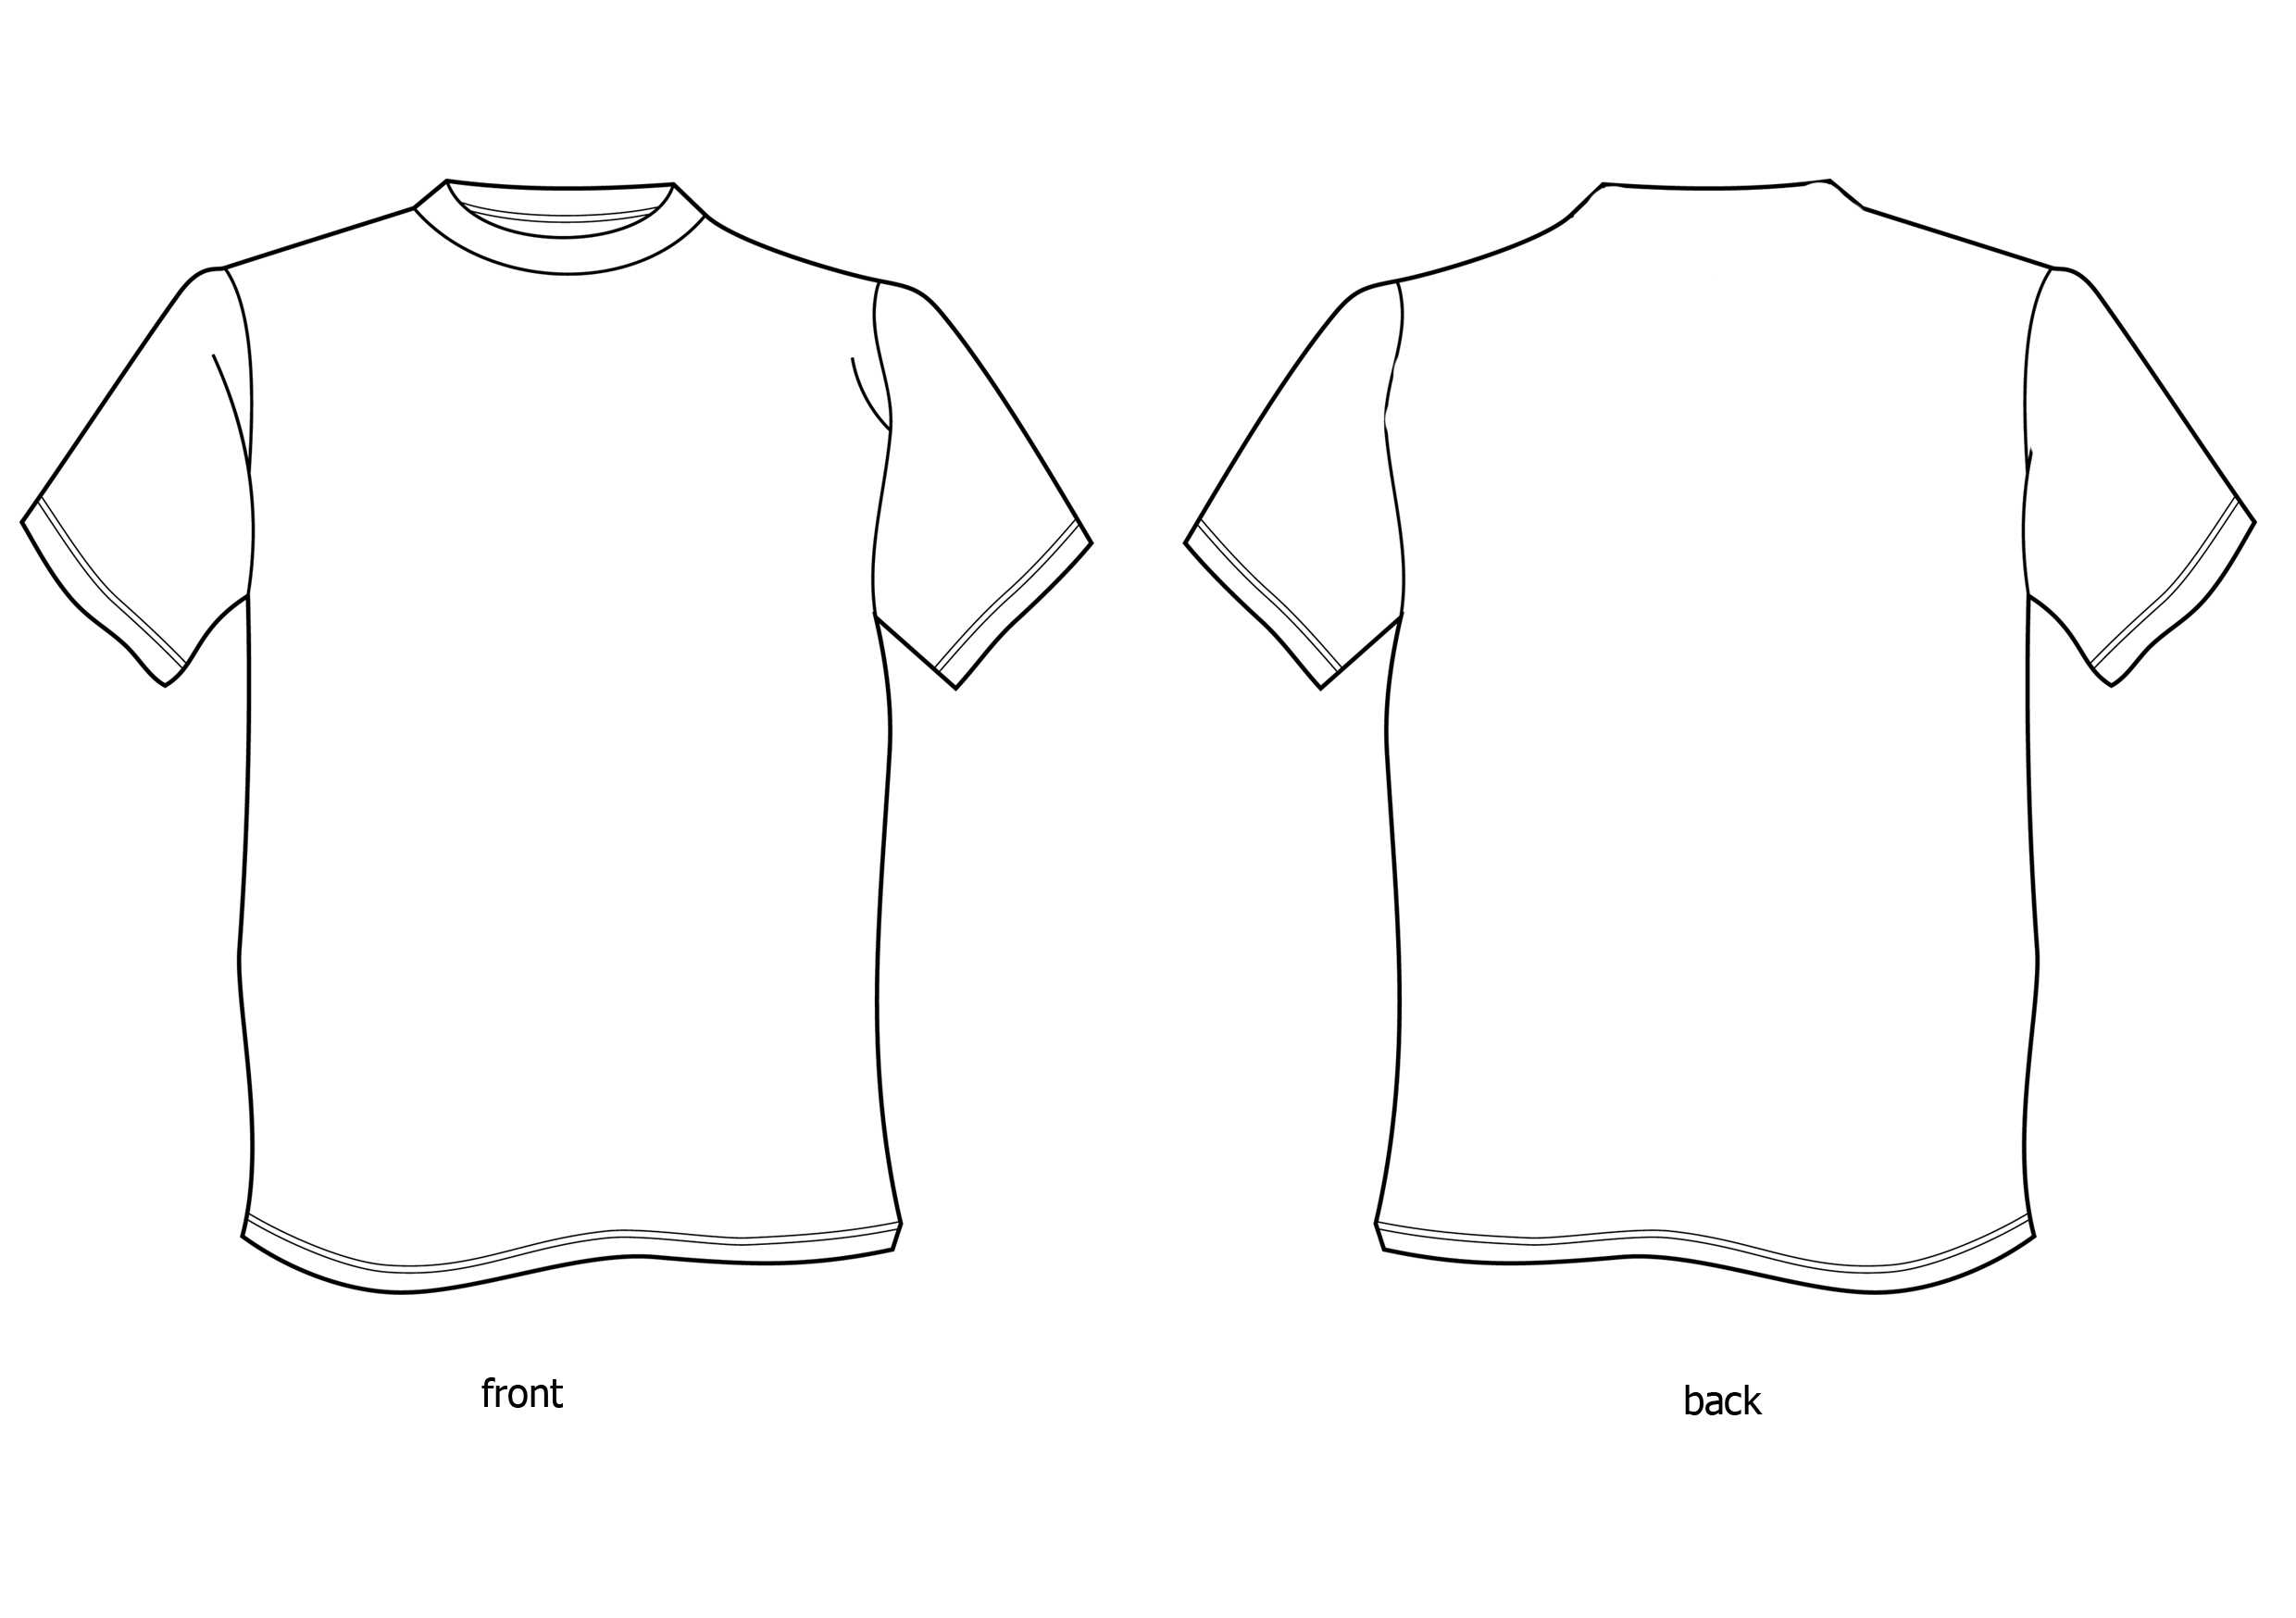 Free T Shirt Design Template, Download Free Clip Art, Free With Regard To Blank T Shirt Design Template Psd